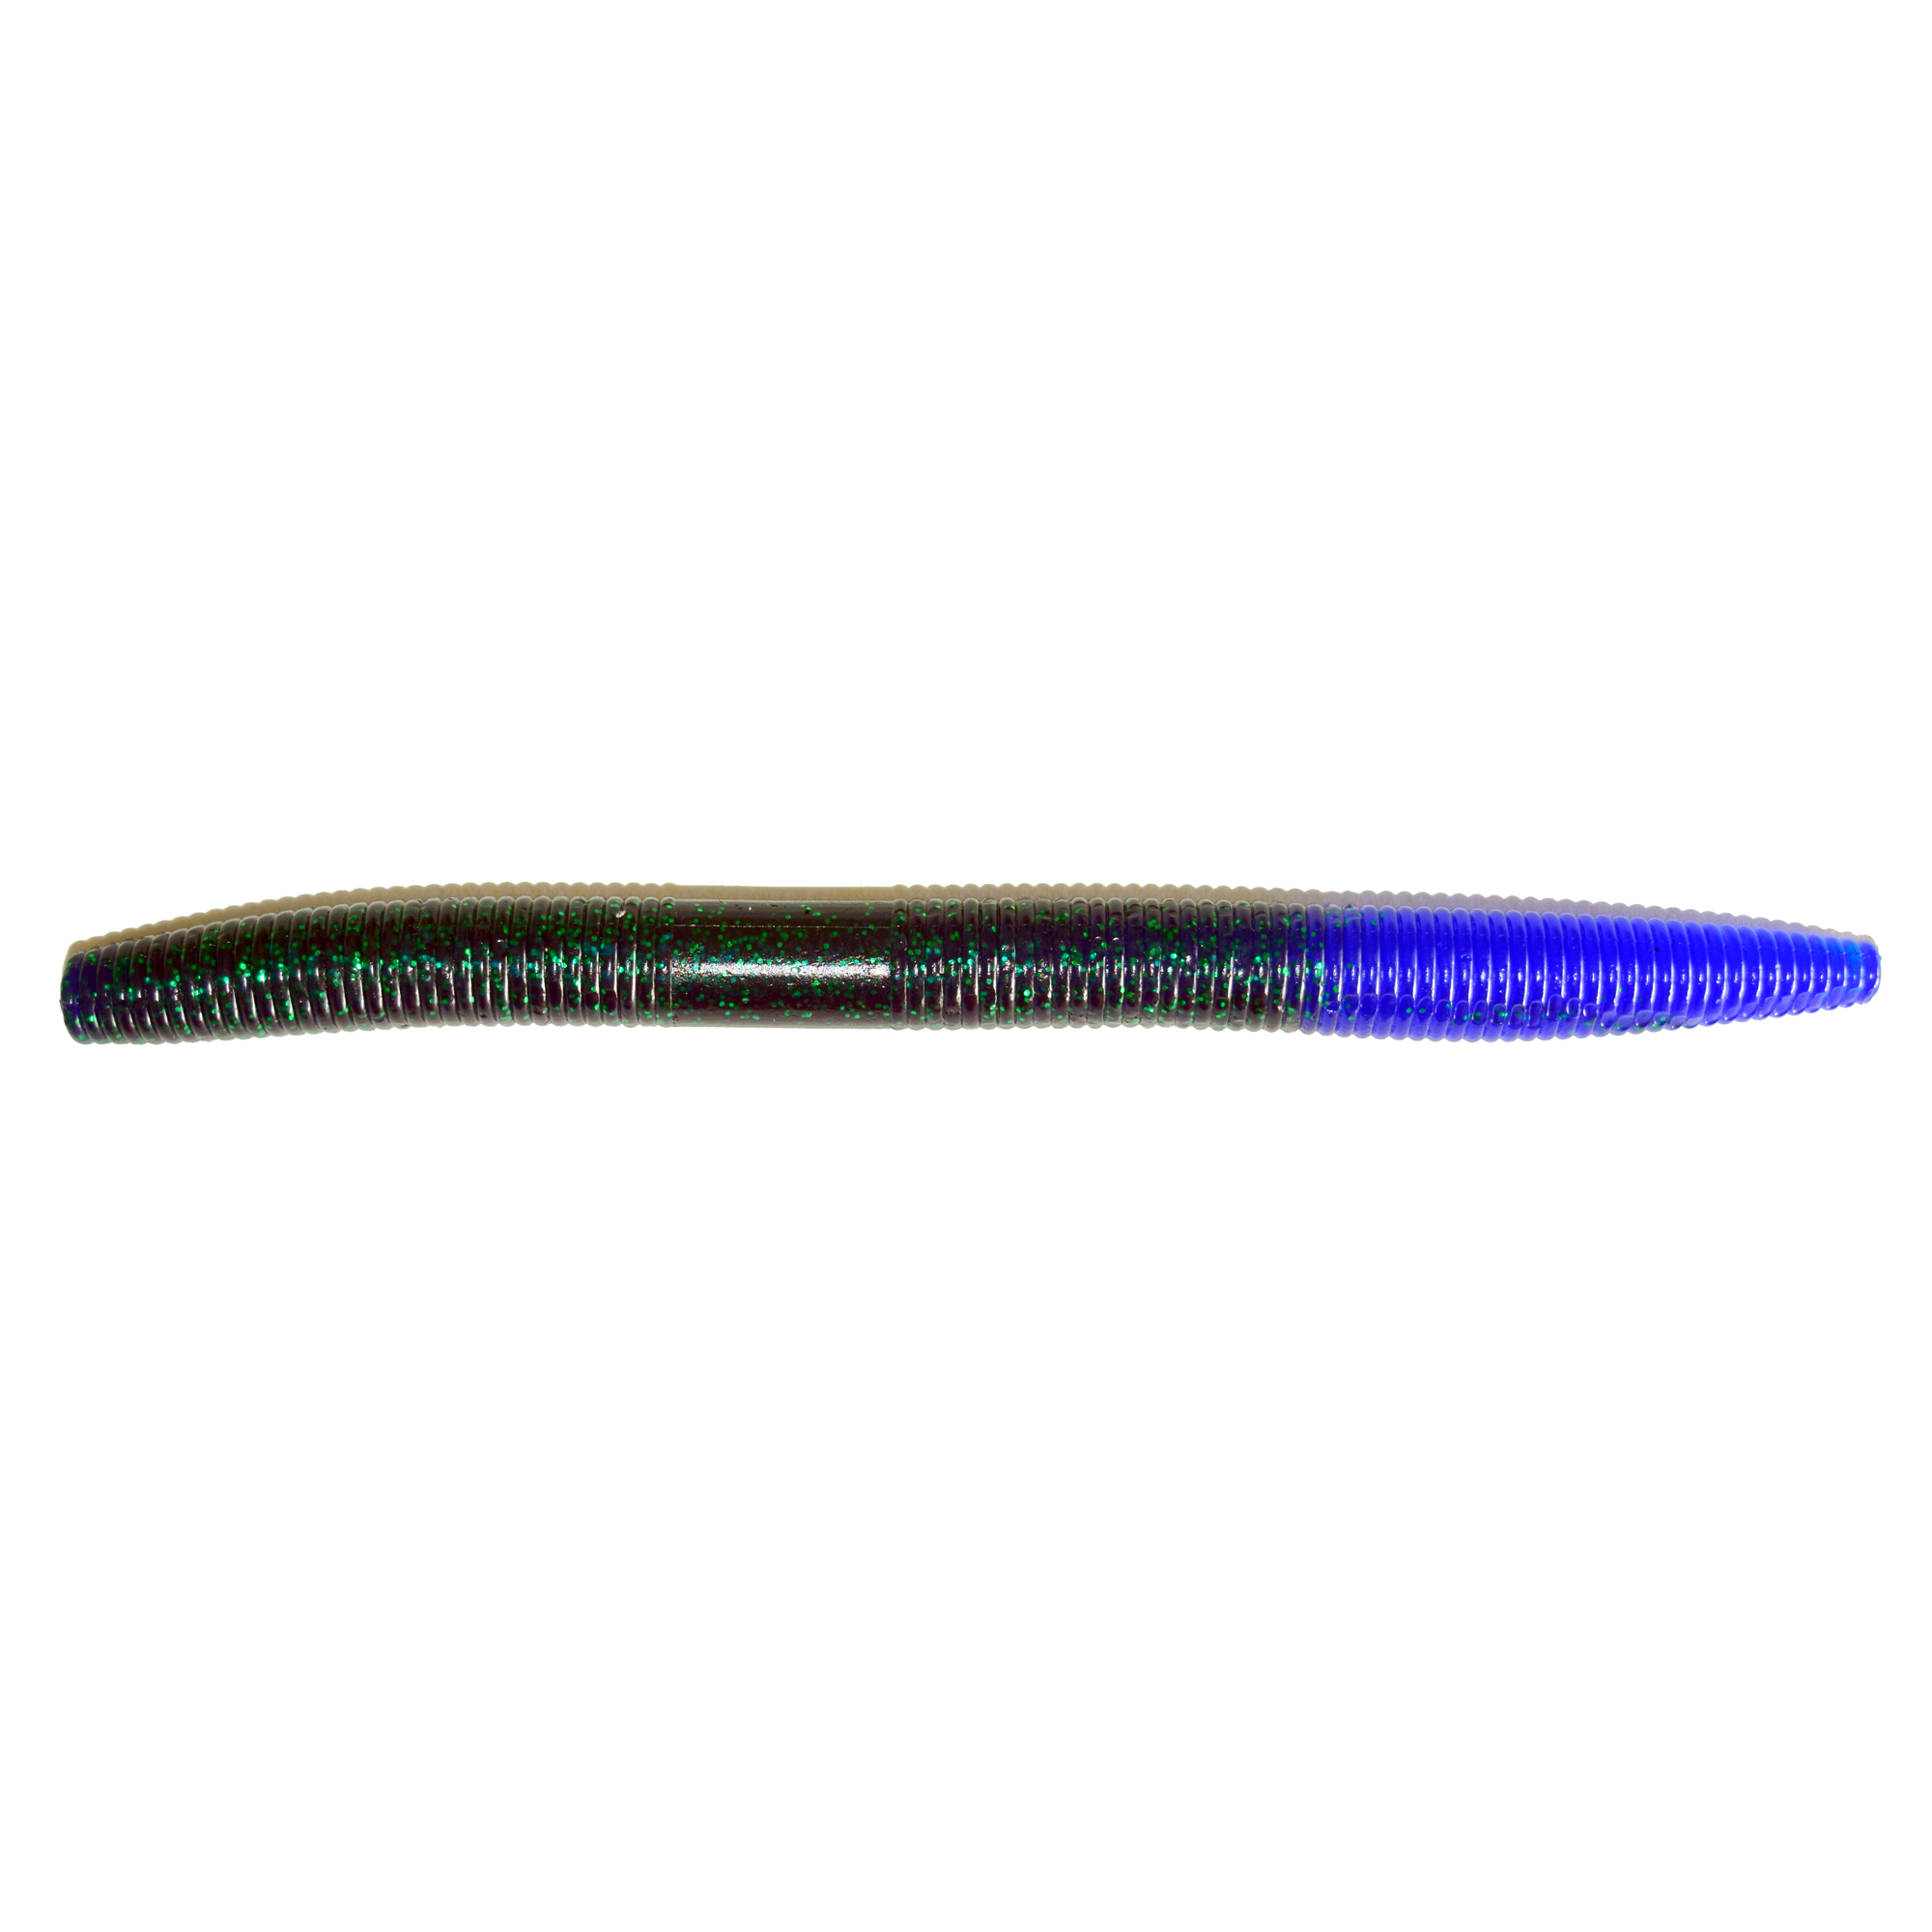 https://www.windingcreekbait.com/store_content/products_media/5dae042a788bd.jpg